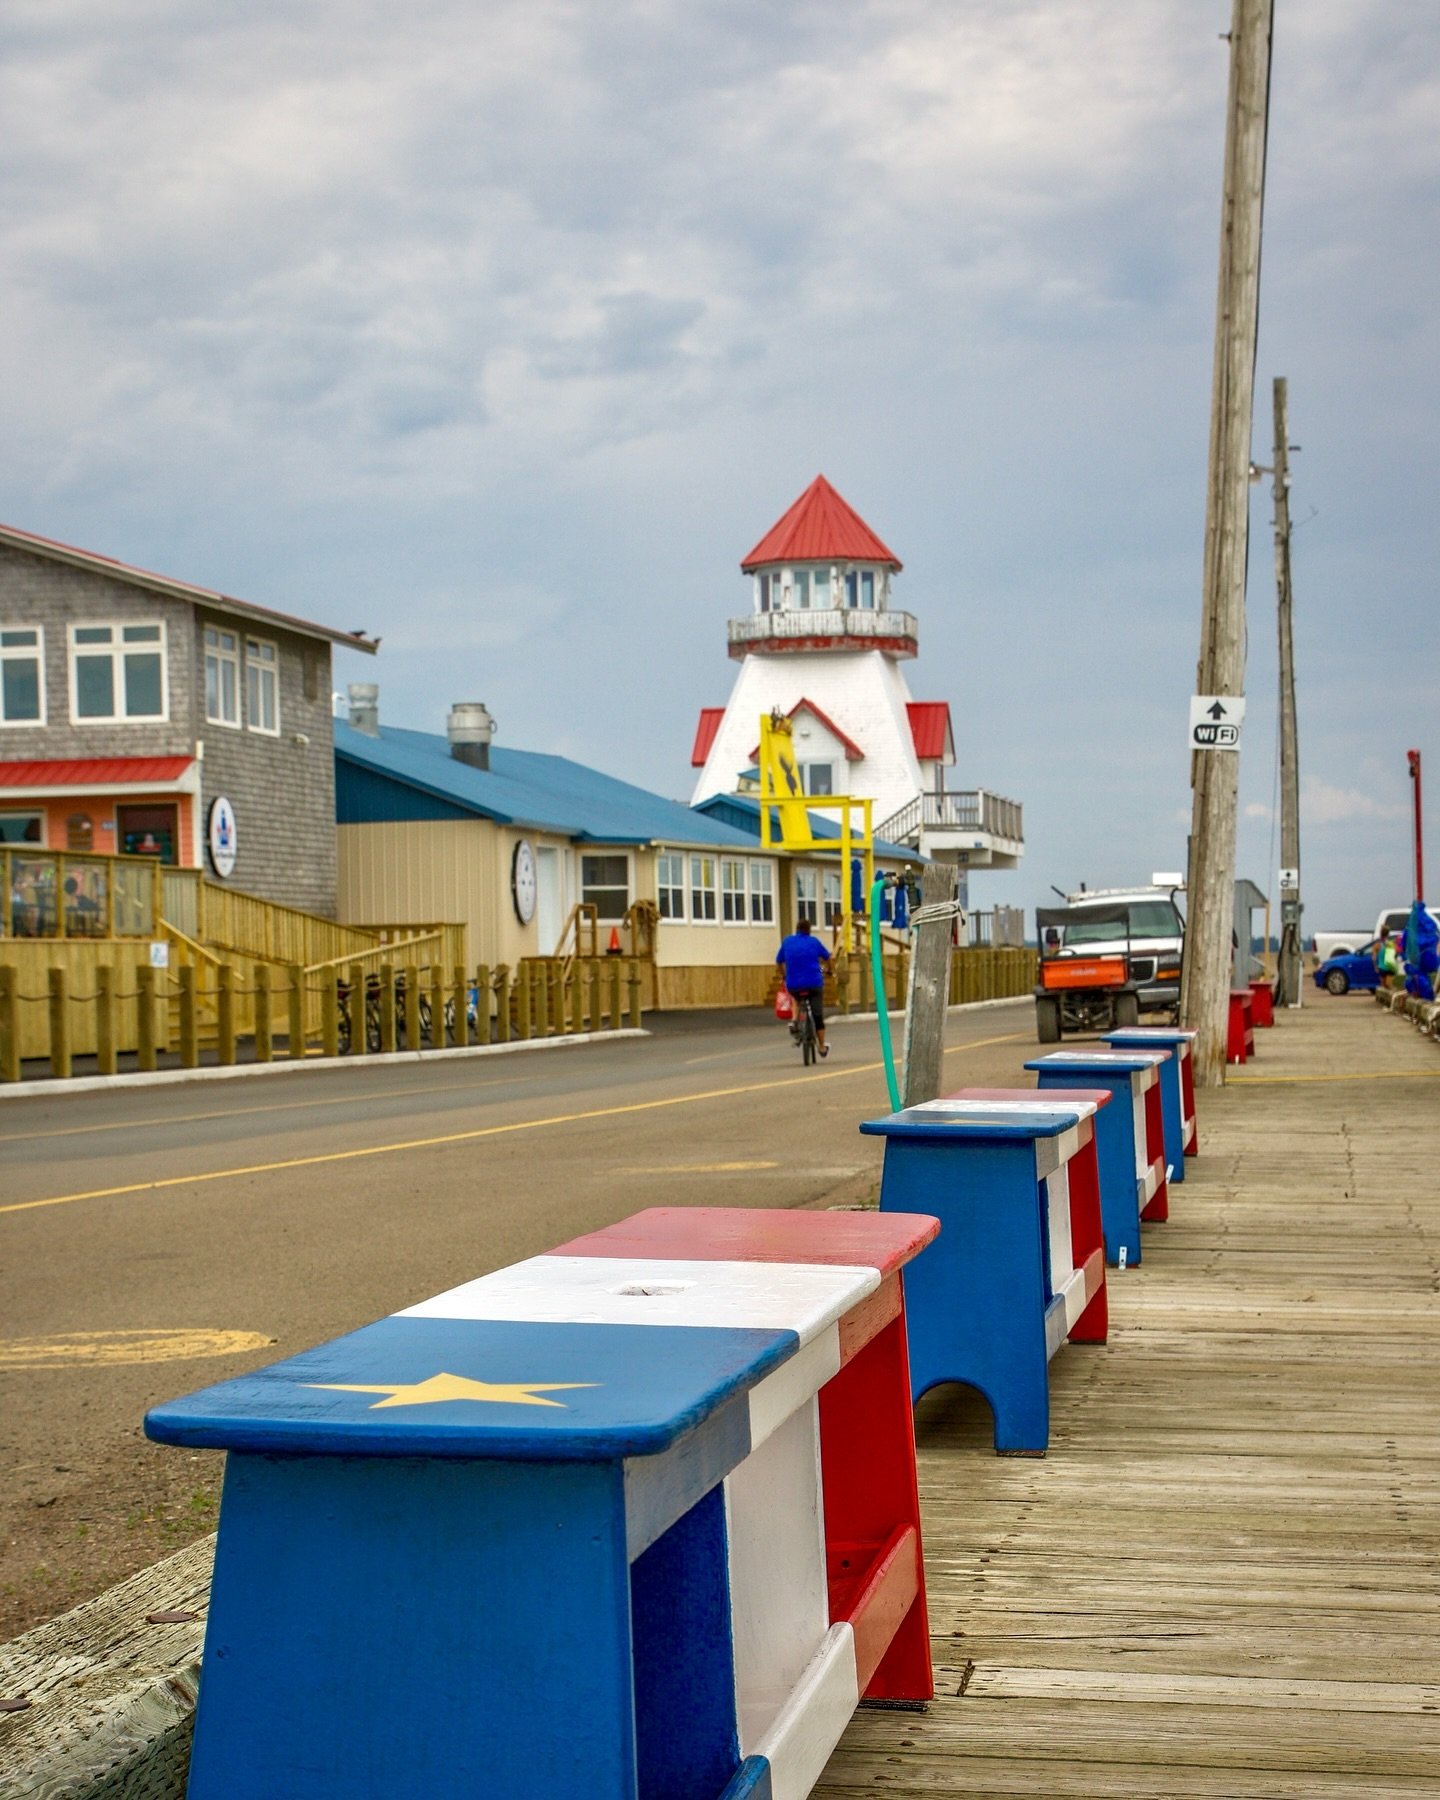 Dive into local culture at Pointe-du-Ch&ecirc;ne with a bite to eat, a refreshing drink, and a stroll through Art on the Wharf. Witness local kids jump off the wharf, a cherished tradition here! ⚓️ Don&rsquo;t miss Lobster🦞Tales - an evening of pure